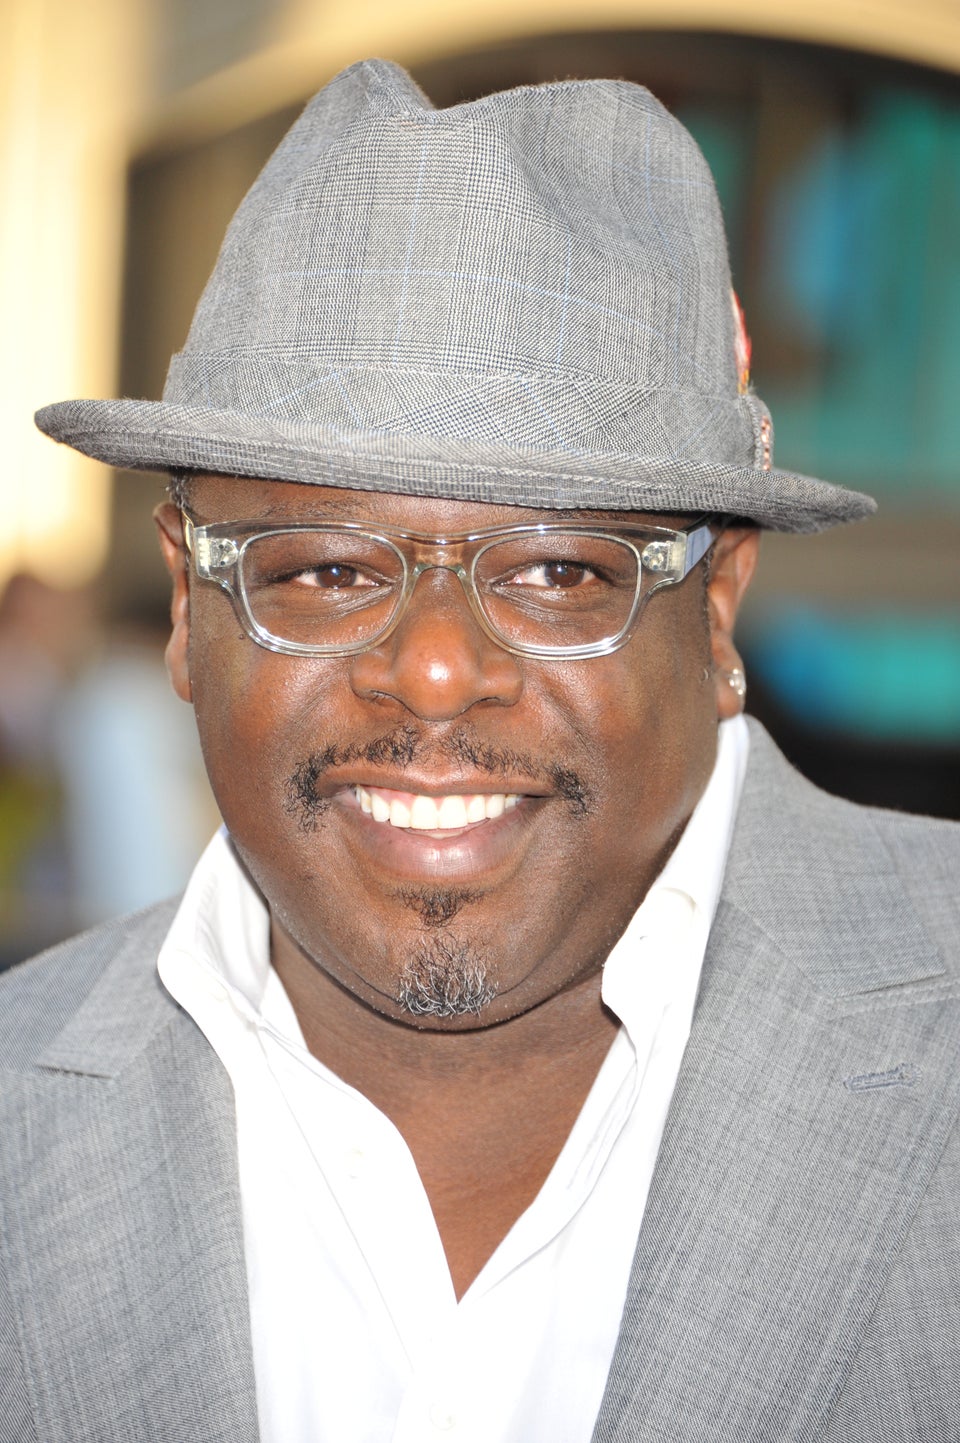 Cedric the Entertainer to Host 3rd Annual Soul Train Awards